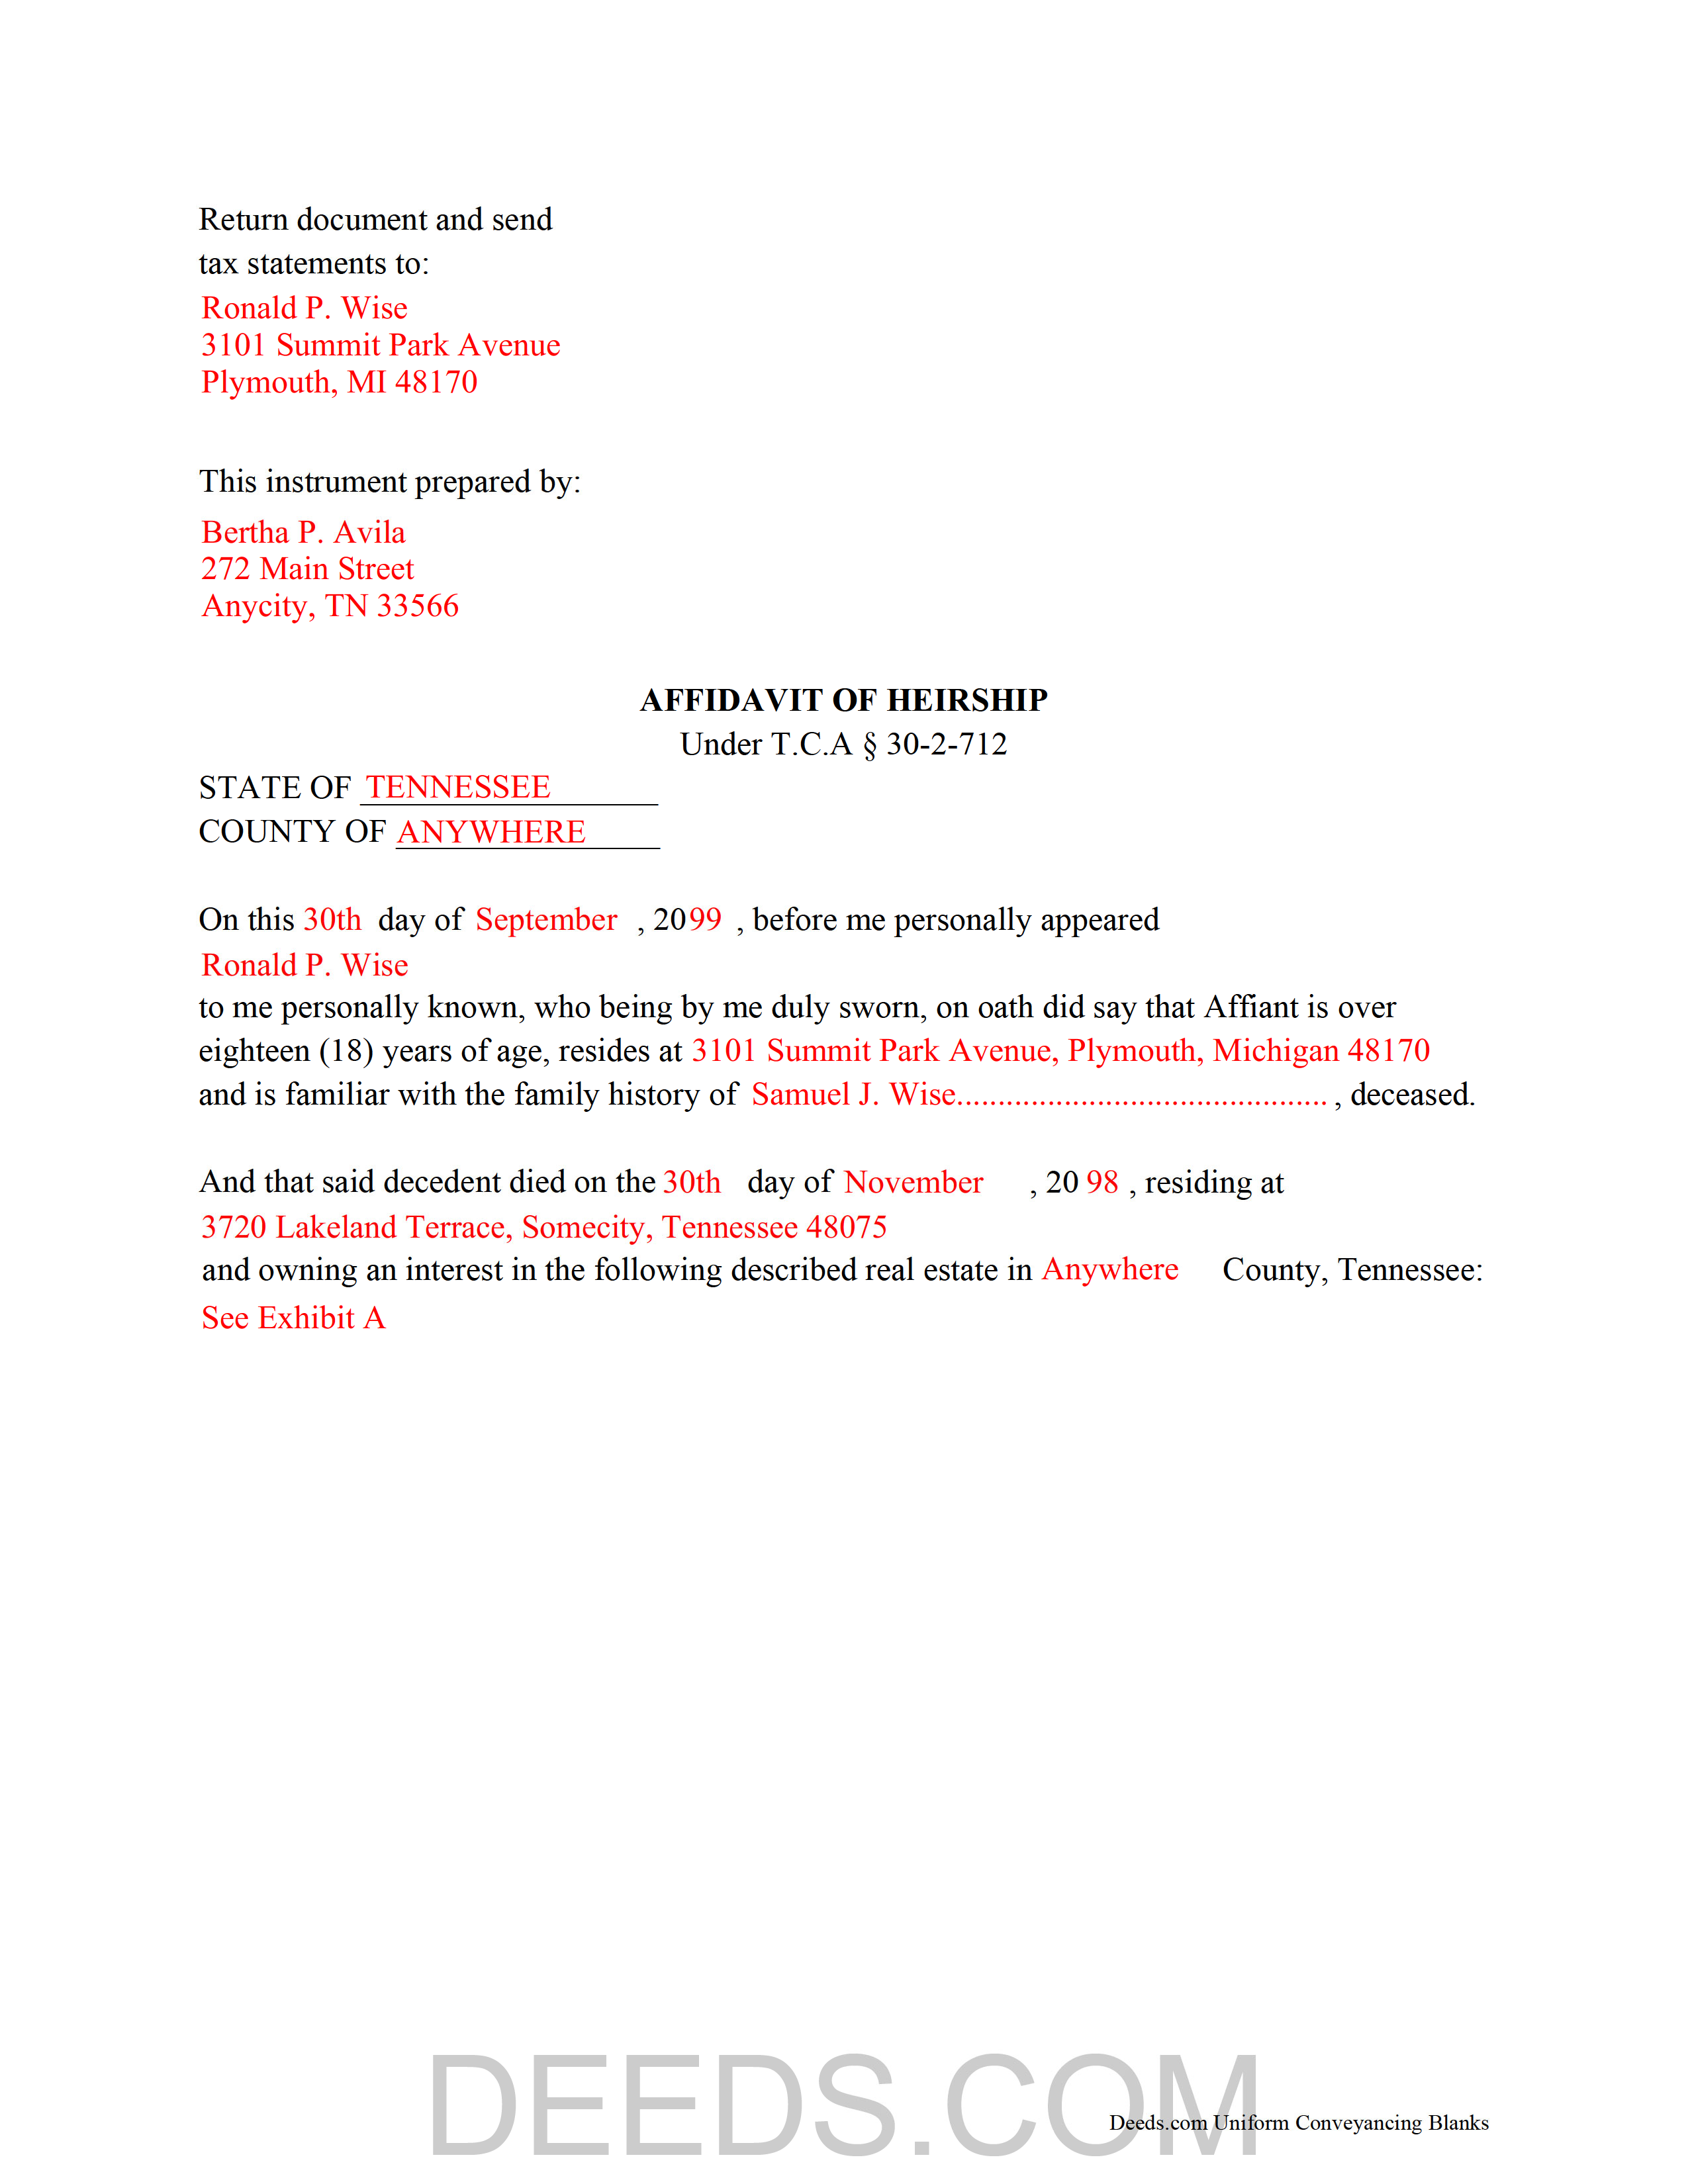 Completed Example of a Affidavit of Heirship Document